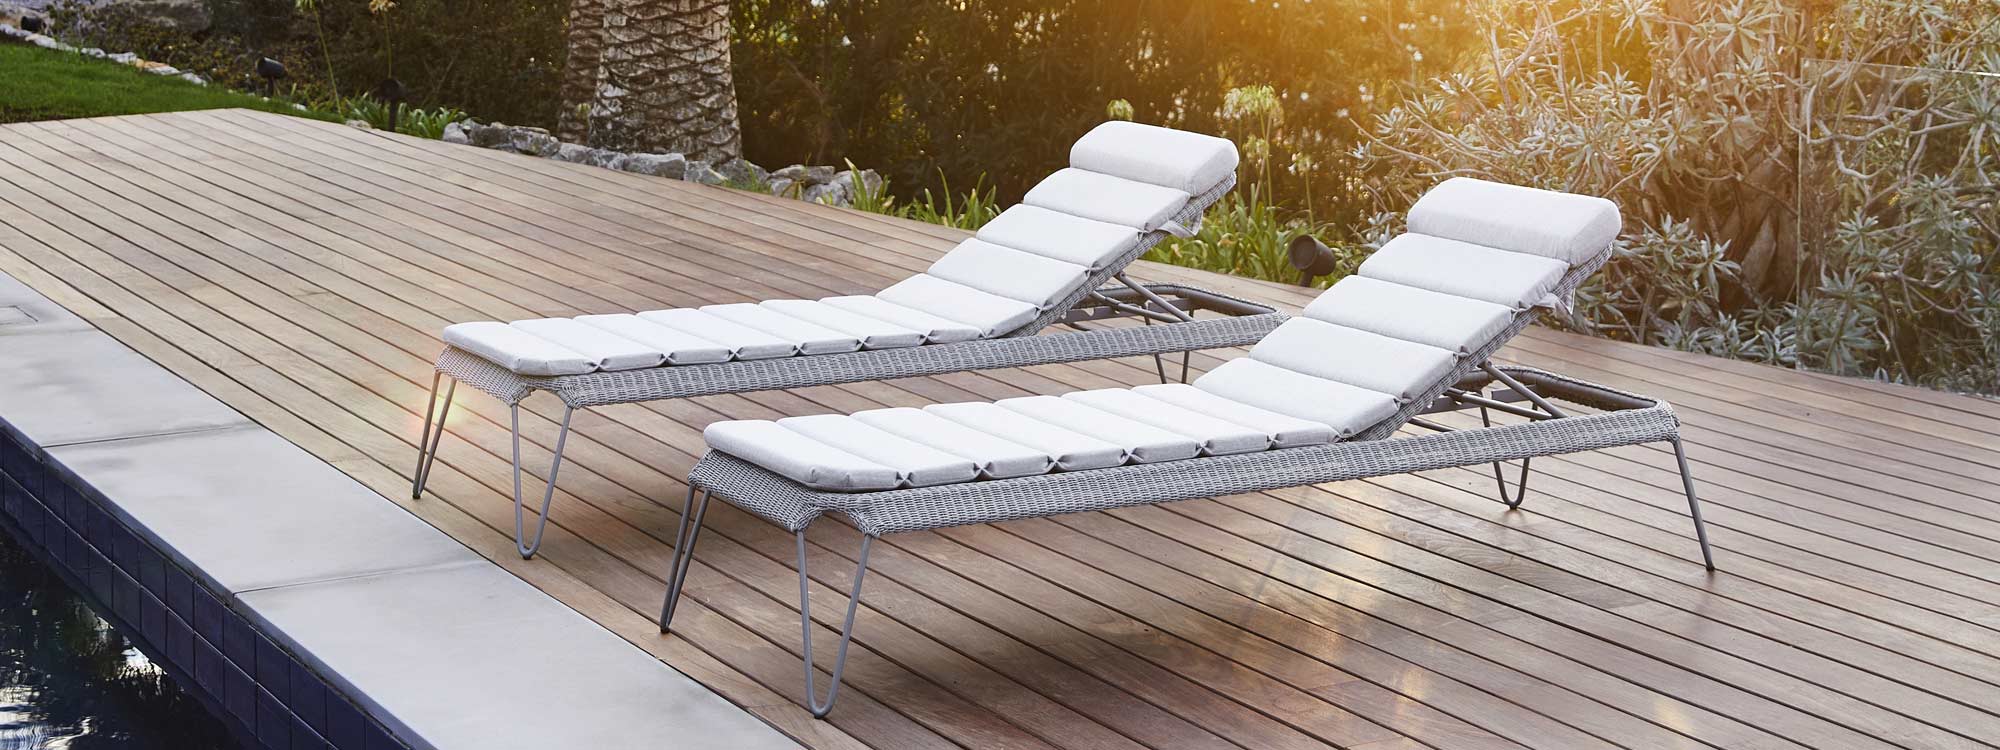 Image of pair of Cane-line Breeze grey sun loungers at dusk on decked poolside